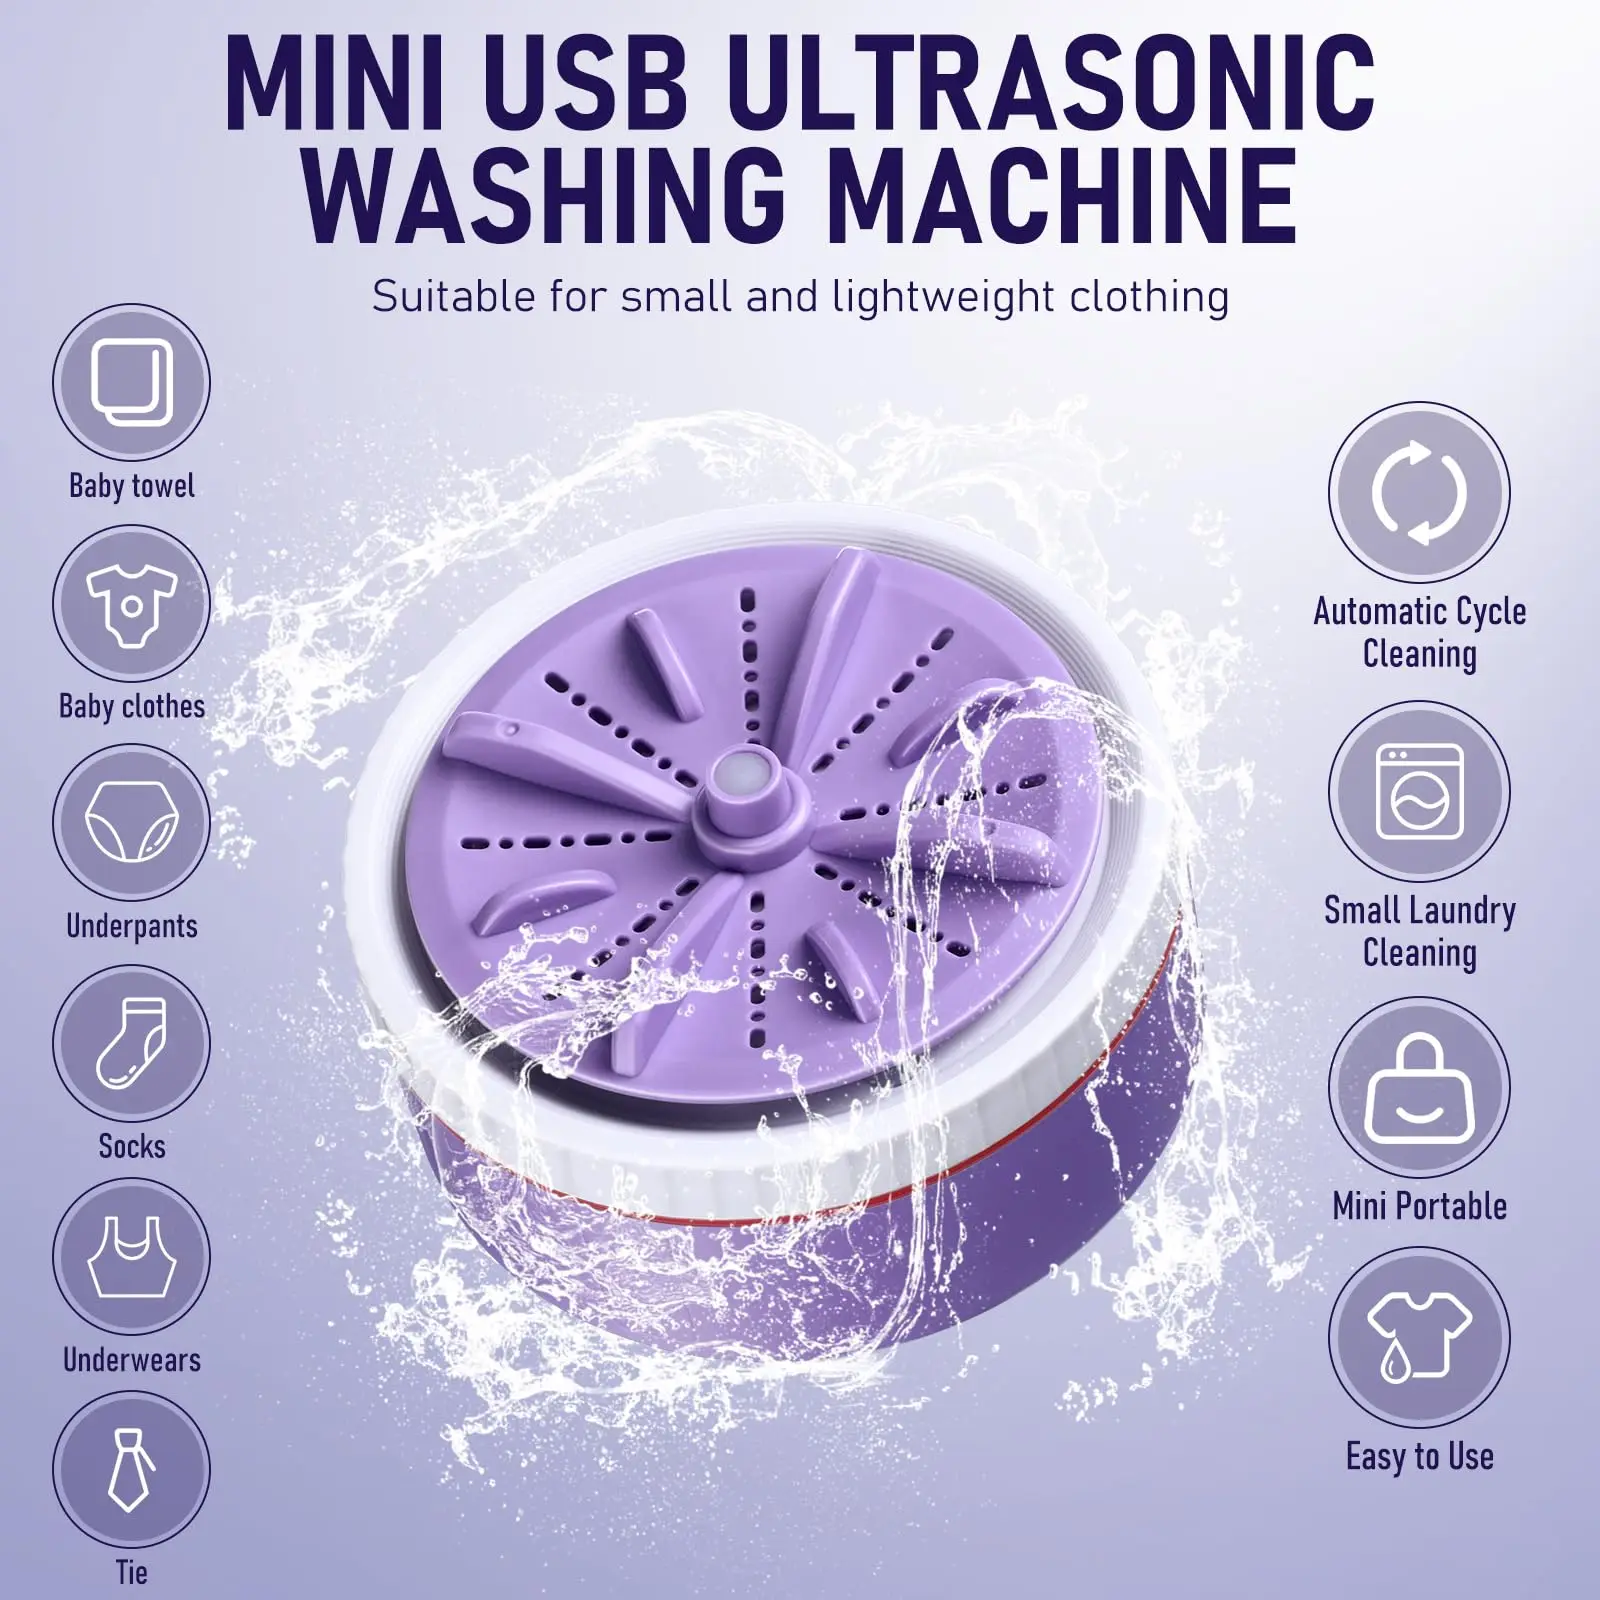 Mini Washing Machine With Remote Control,Automatic Rotating,3 in 1 Portable - $25.84